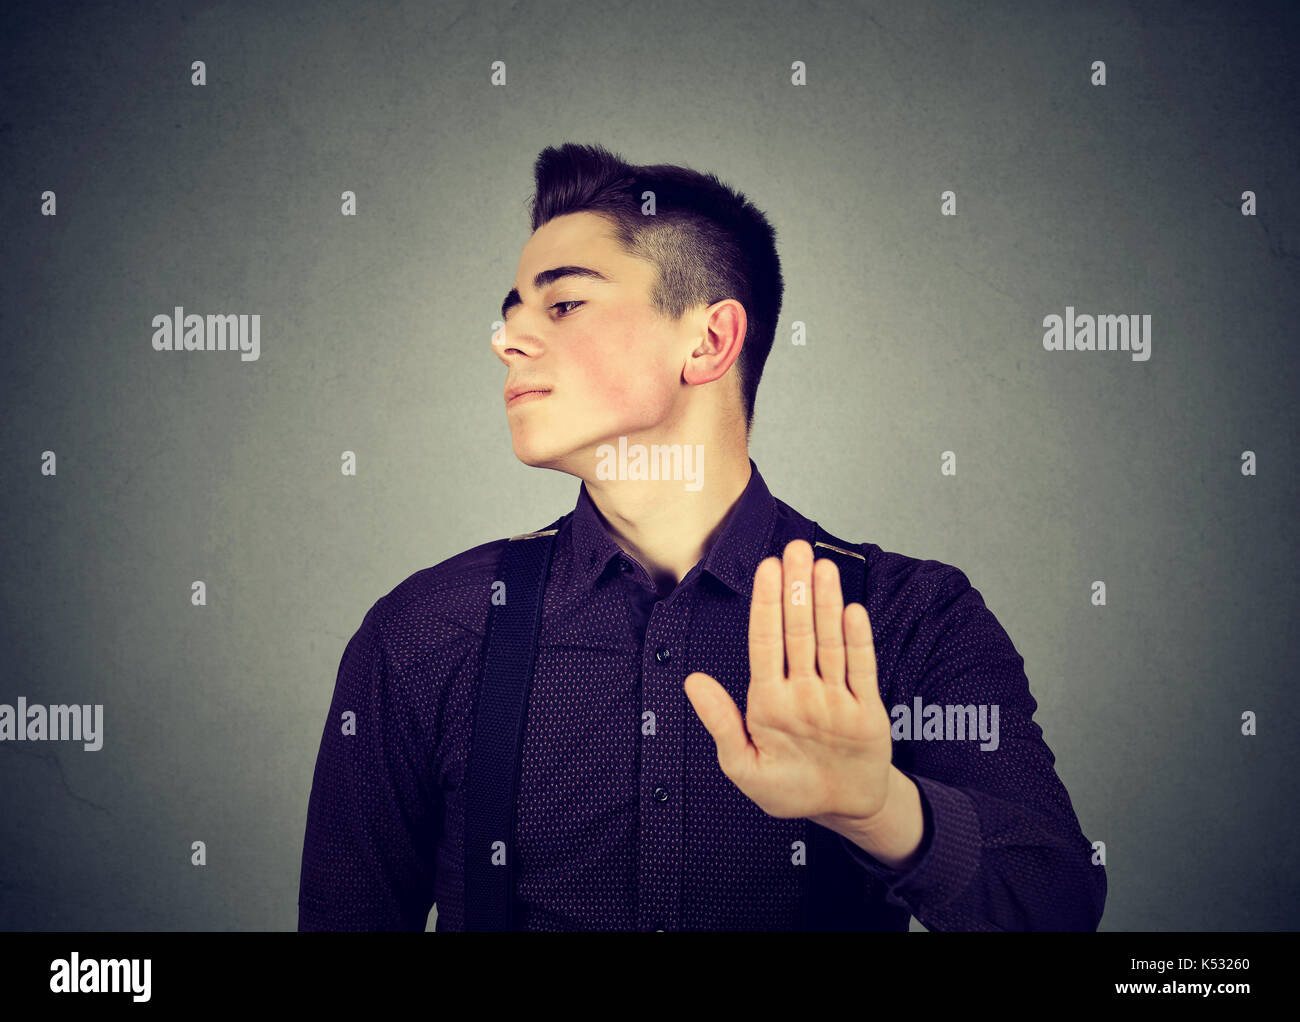 Closeup portrait angry man giving talk to hand gesture with palm outward isolated on gray wall background. Negative human emotion feeling body languag Stock Photo